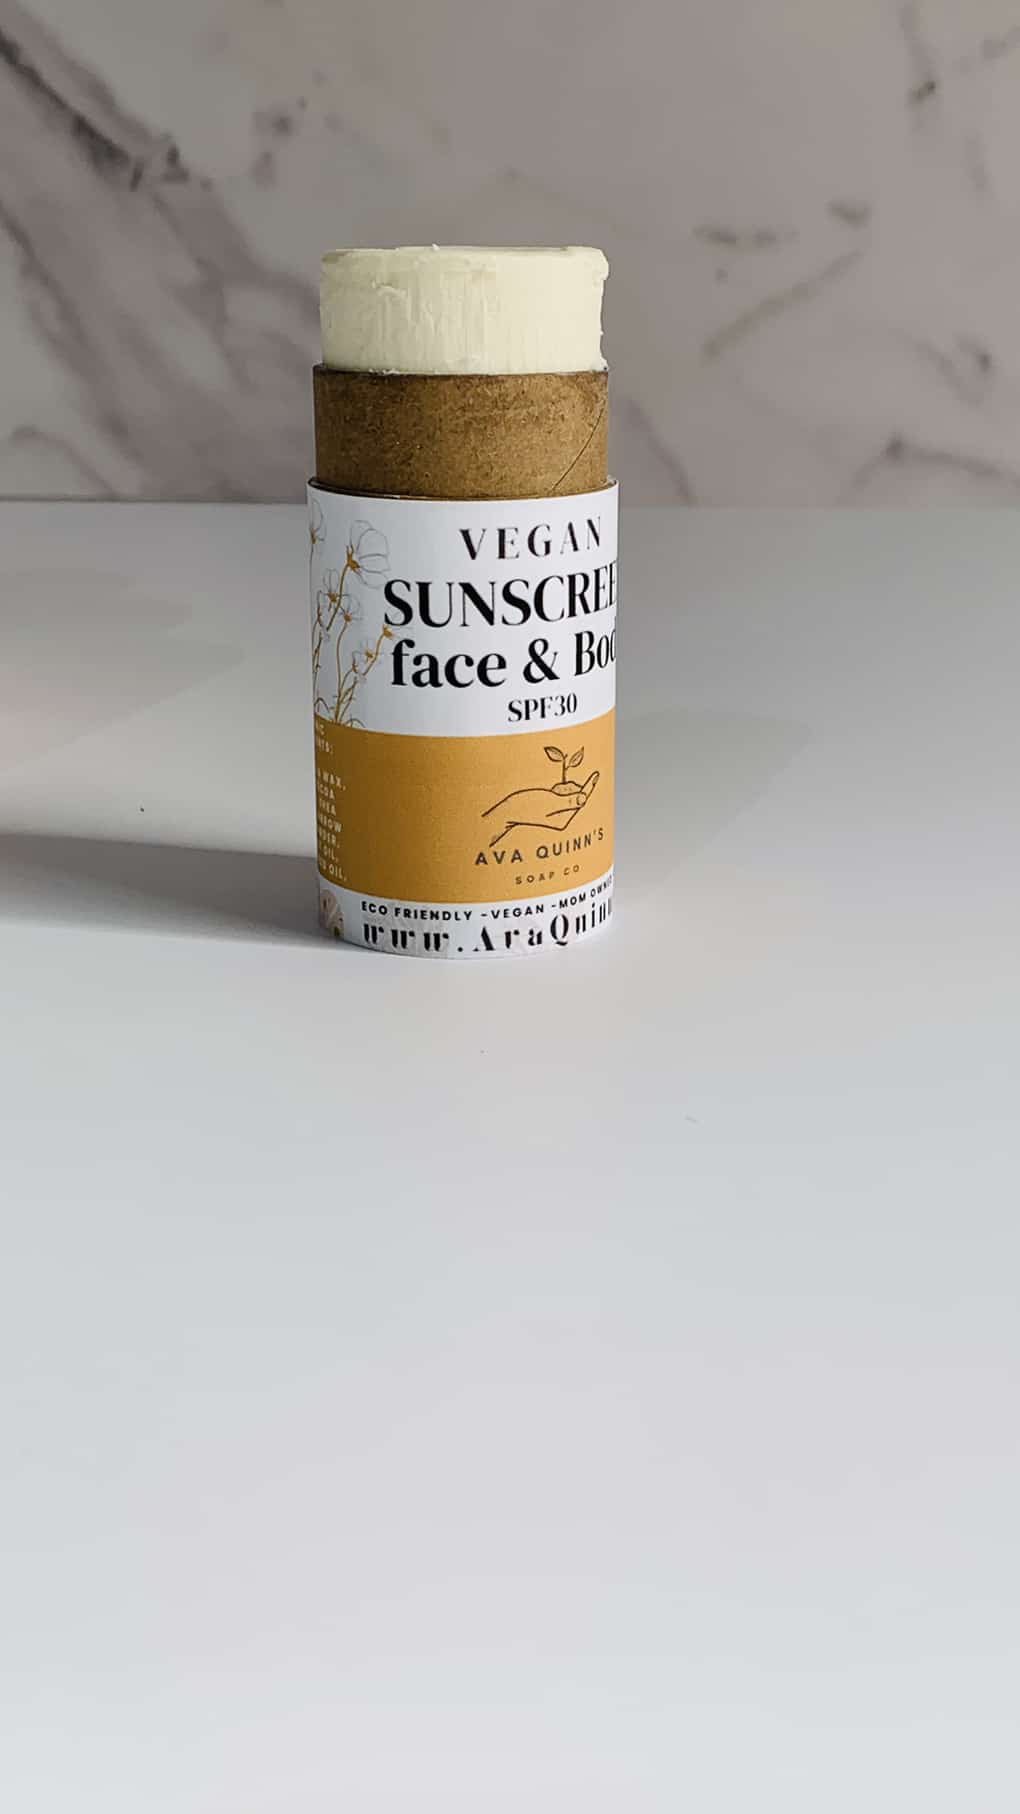 Vegan sunscreen bottle with natural ingredients for face and body protection